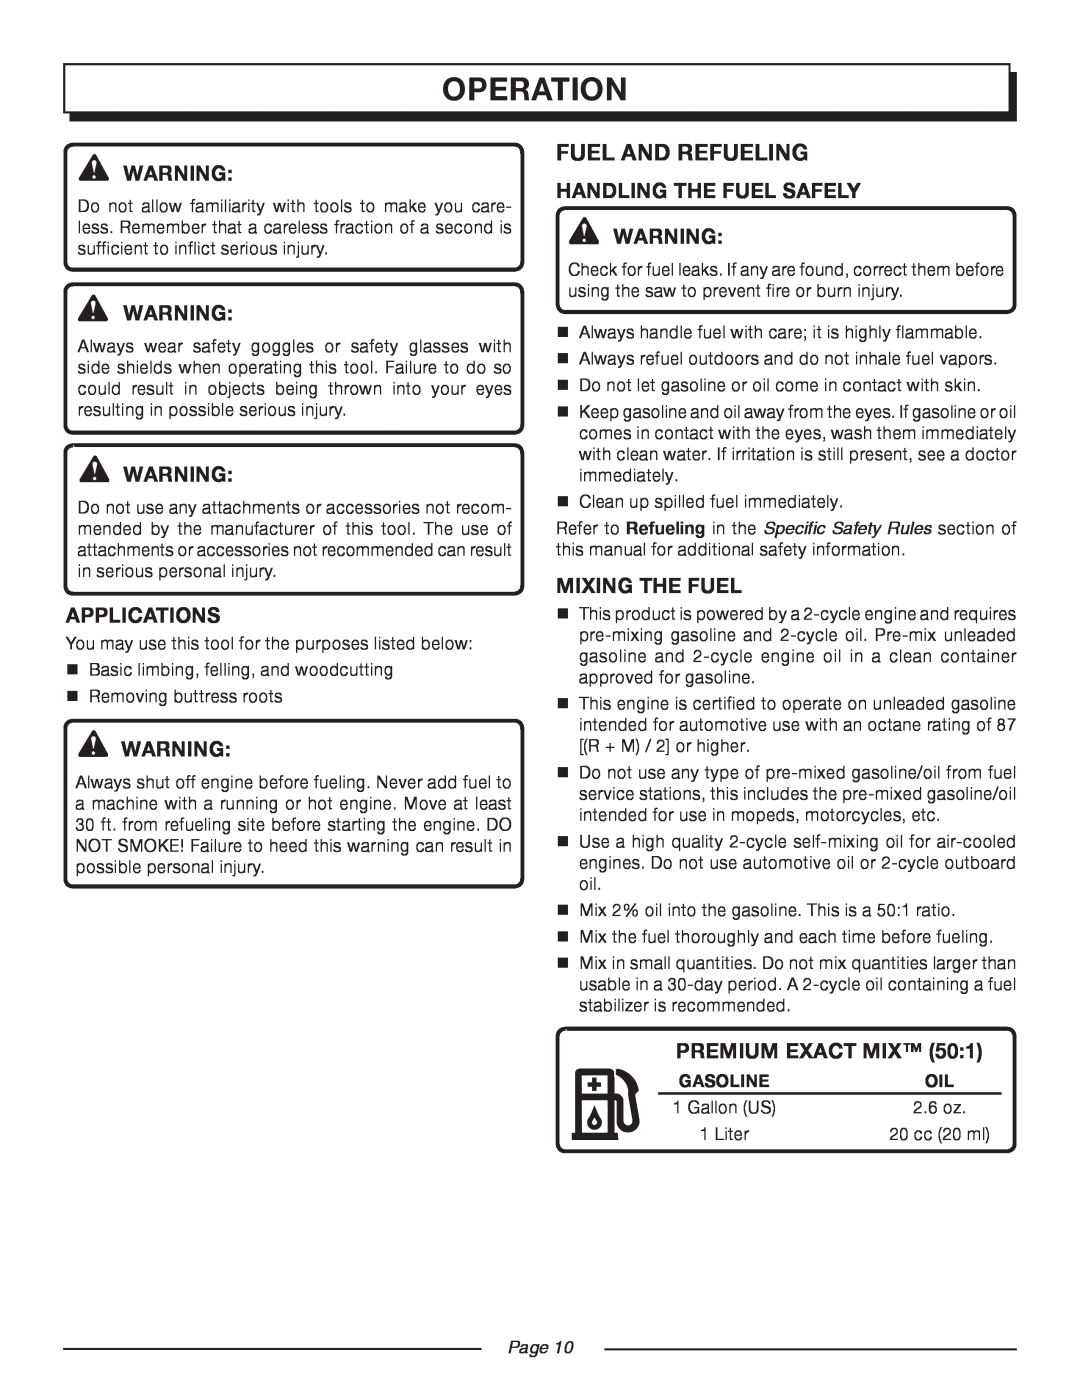 Homelite UT10552 manual operation, Fuel And Refueling, Page 